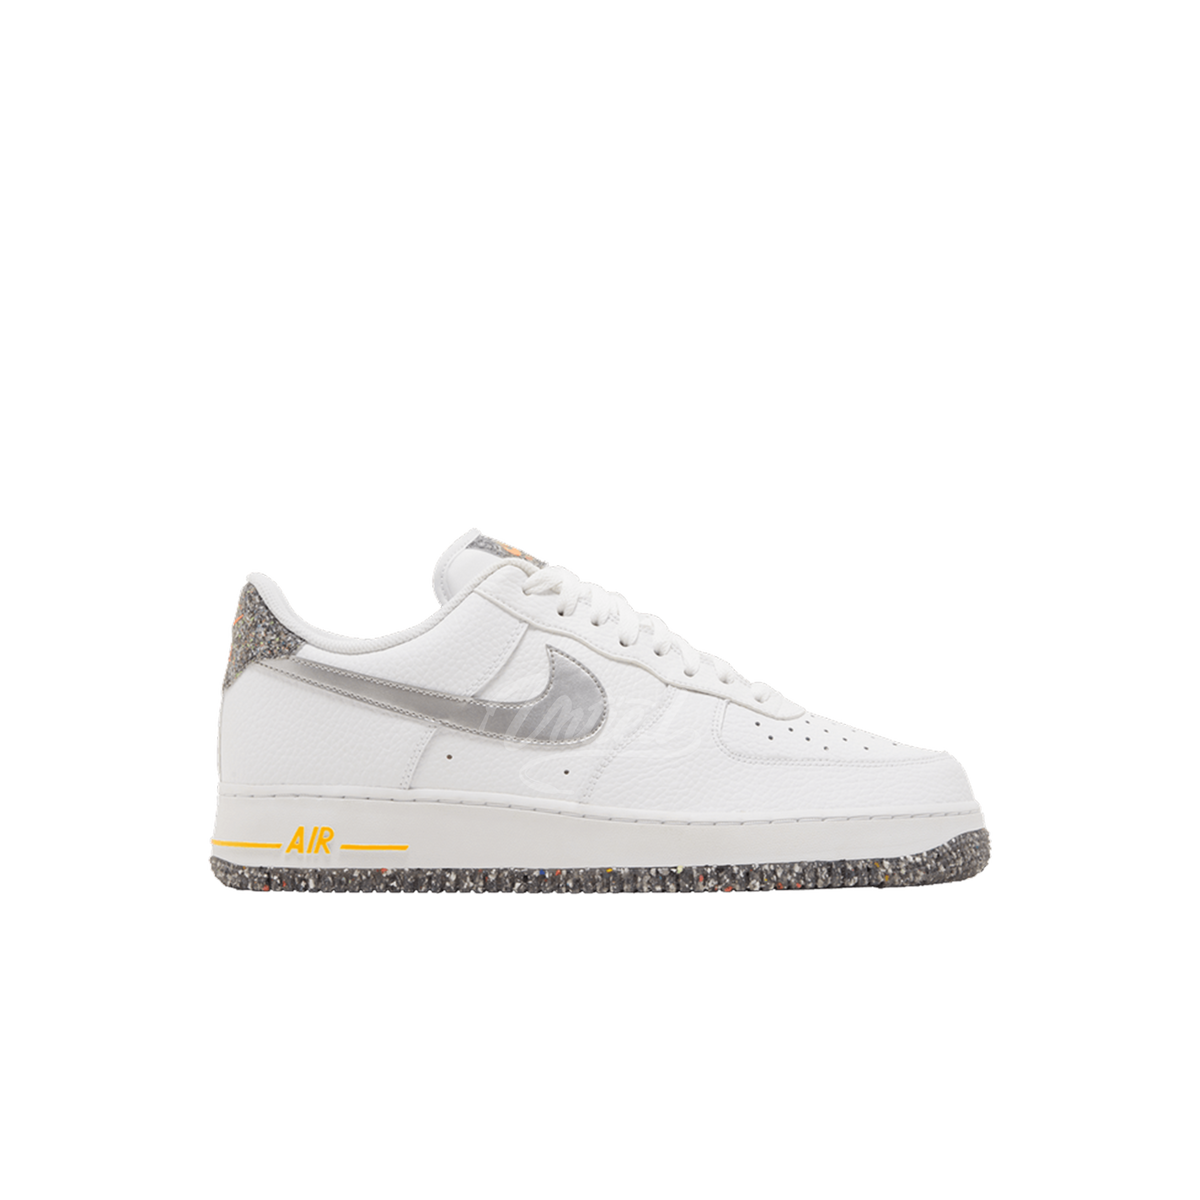 Nike Air Force 1 "Crater Grind White"